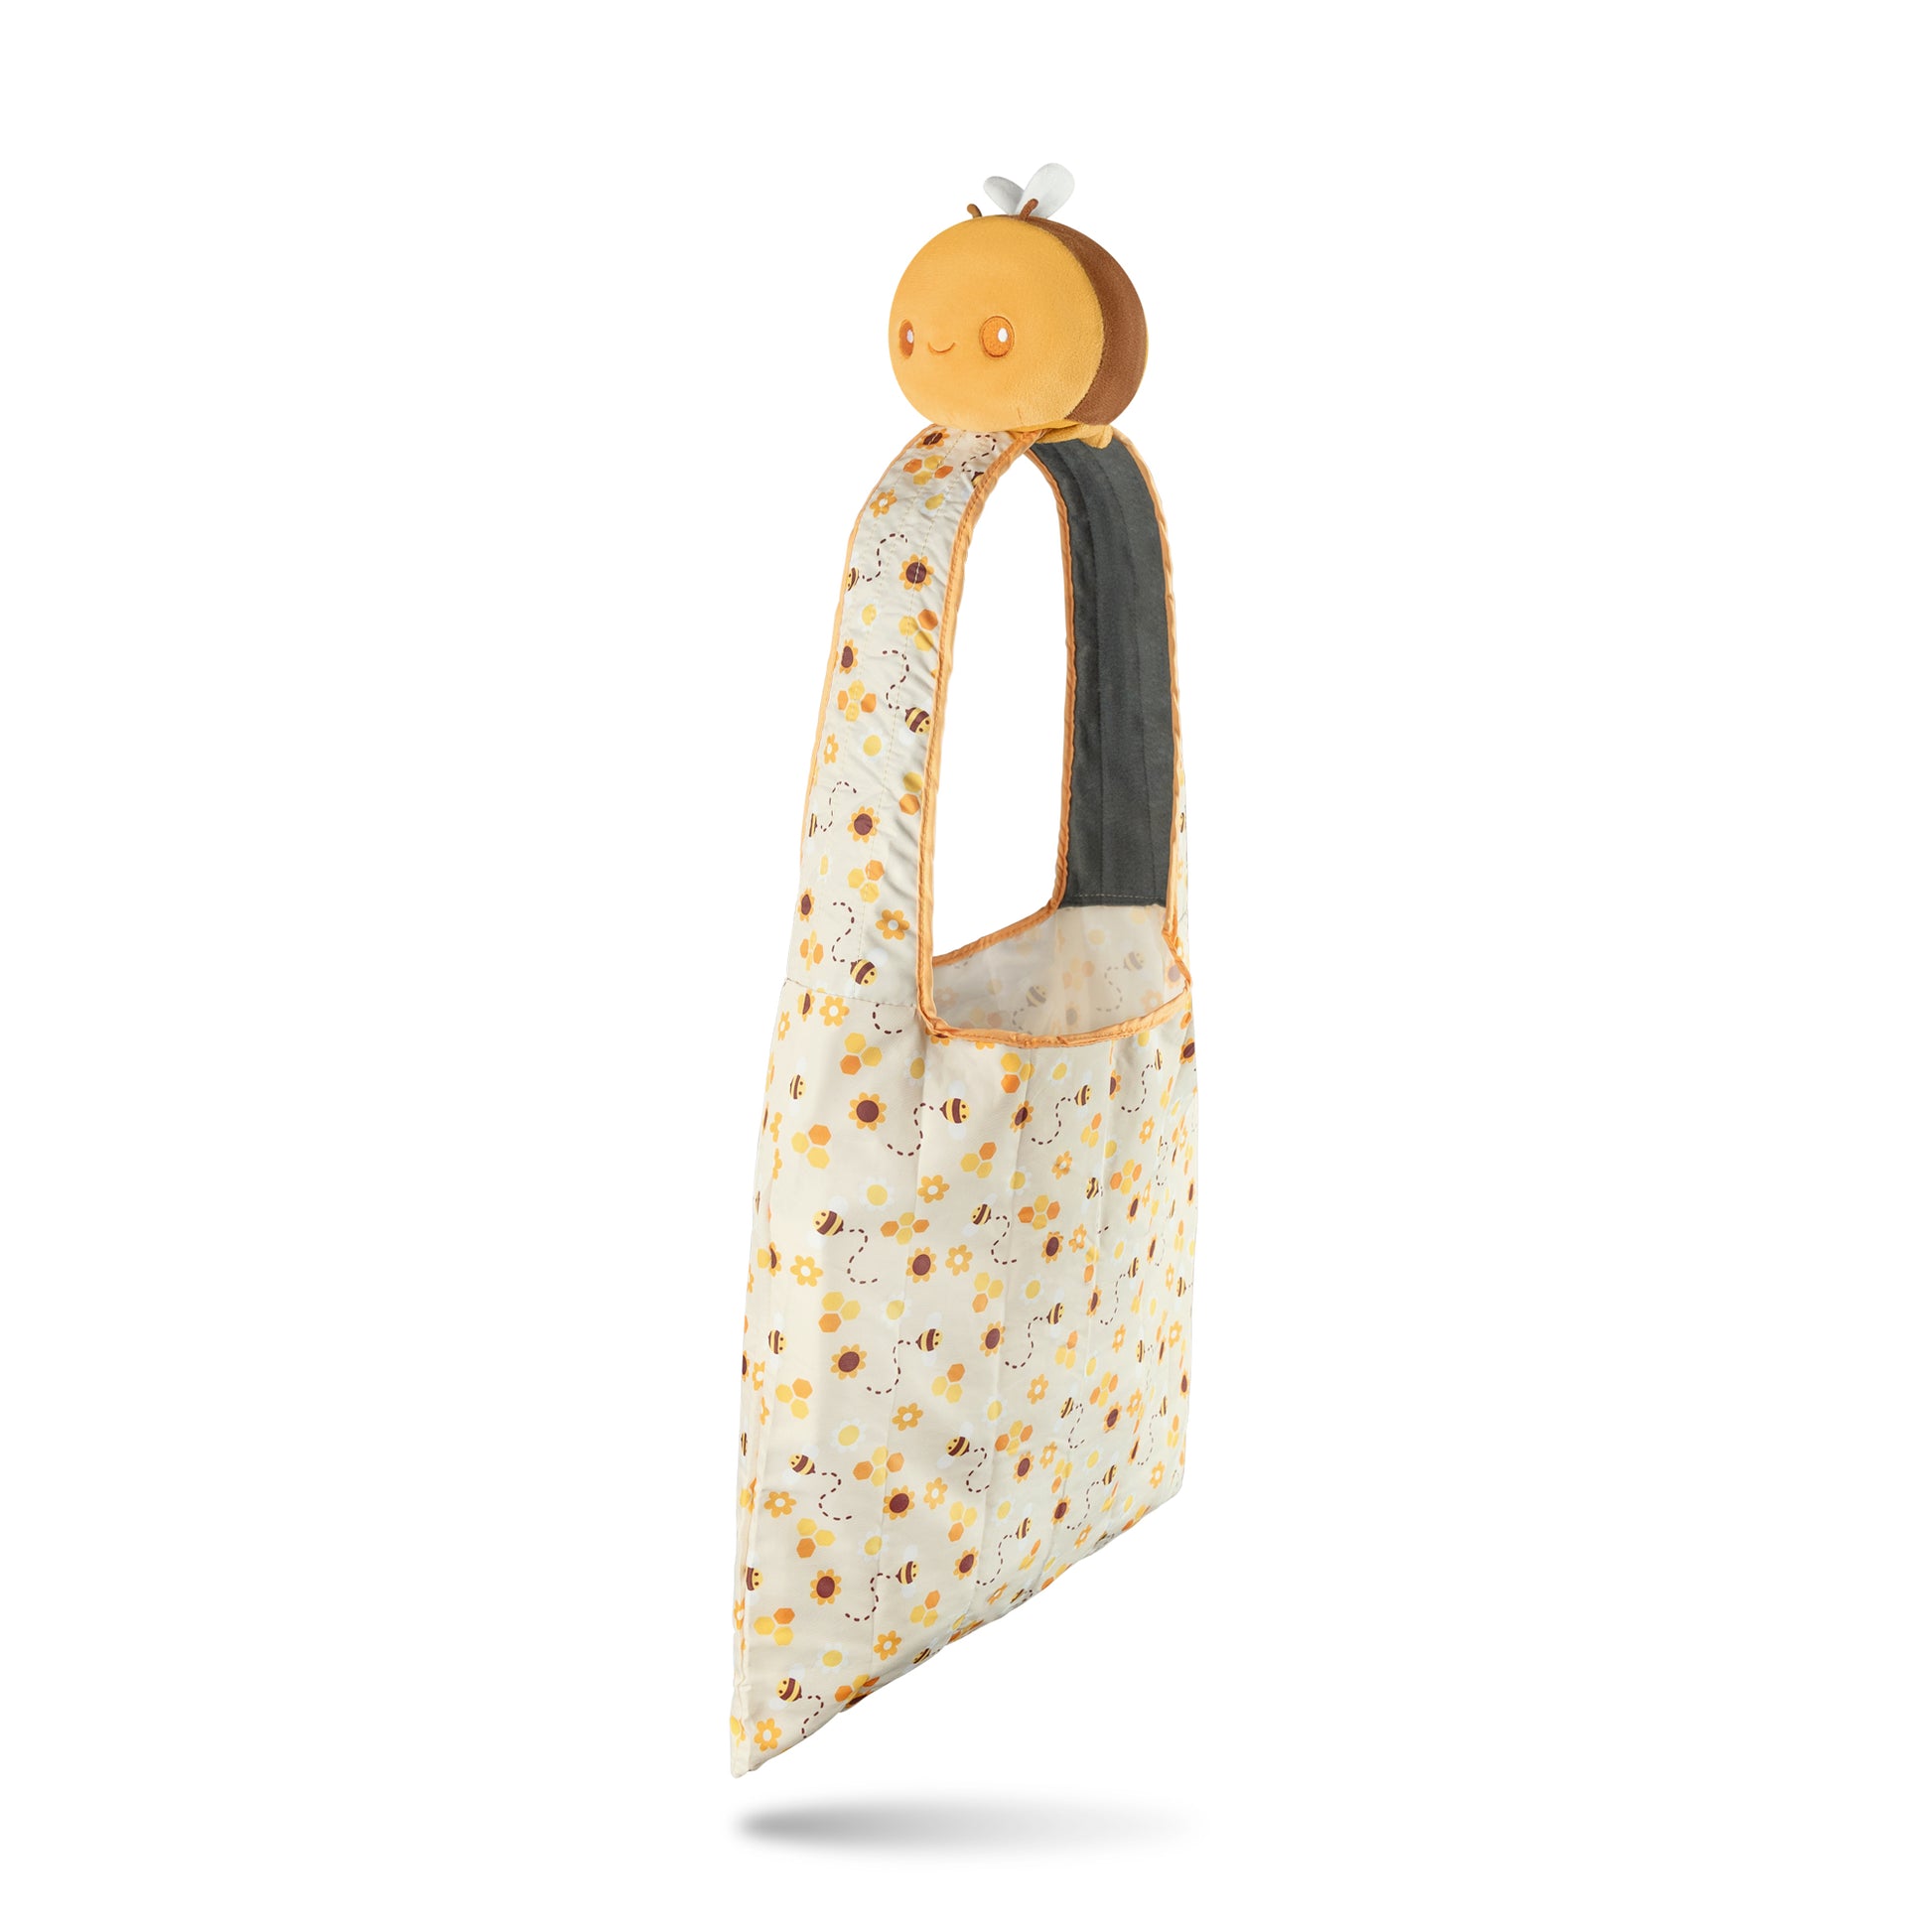 A Plushiverse Honeybee Plushie Tote Bag by TeeTurtle, with orange polka dots on a white background.
